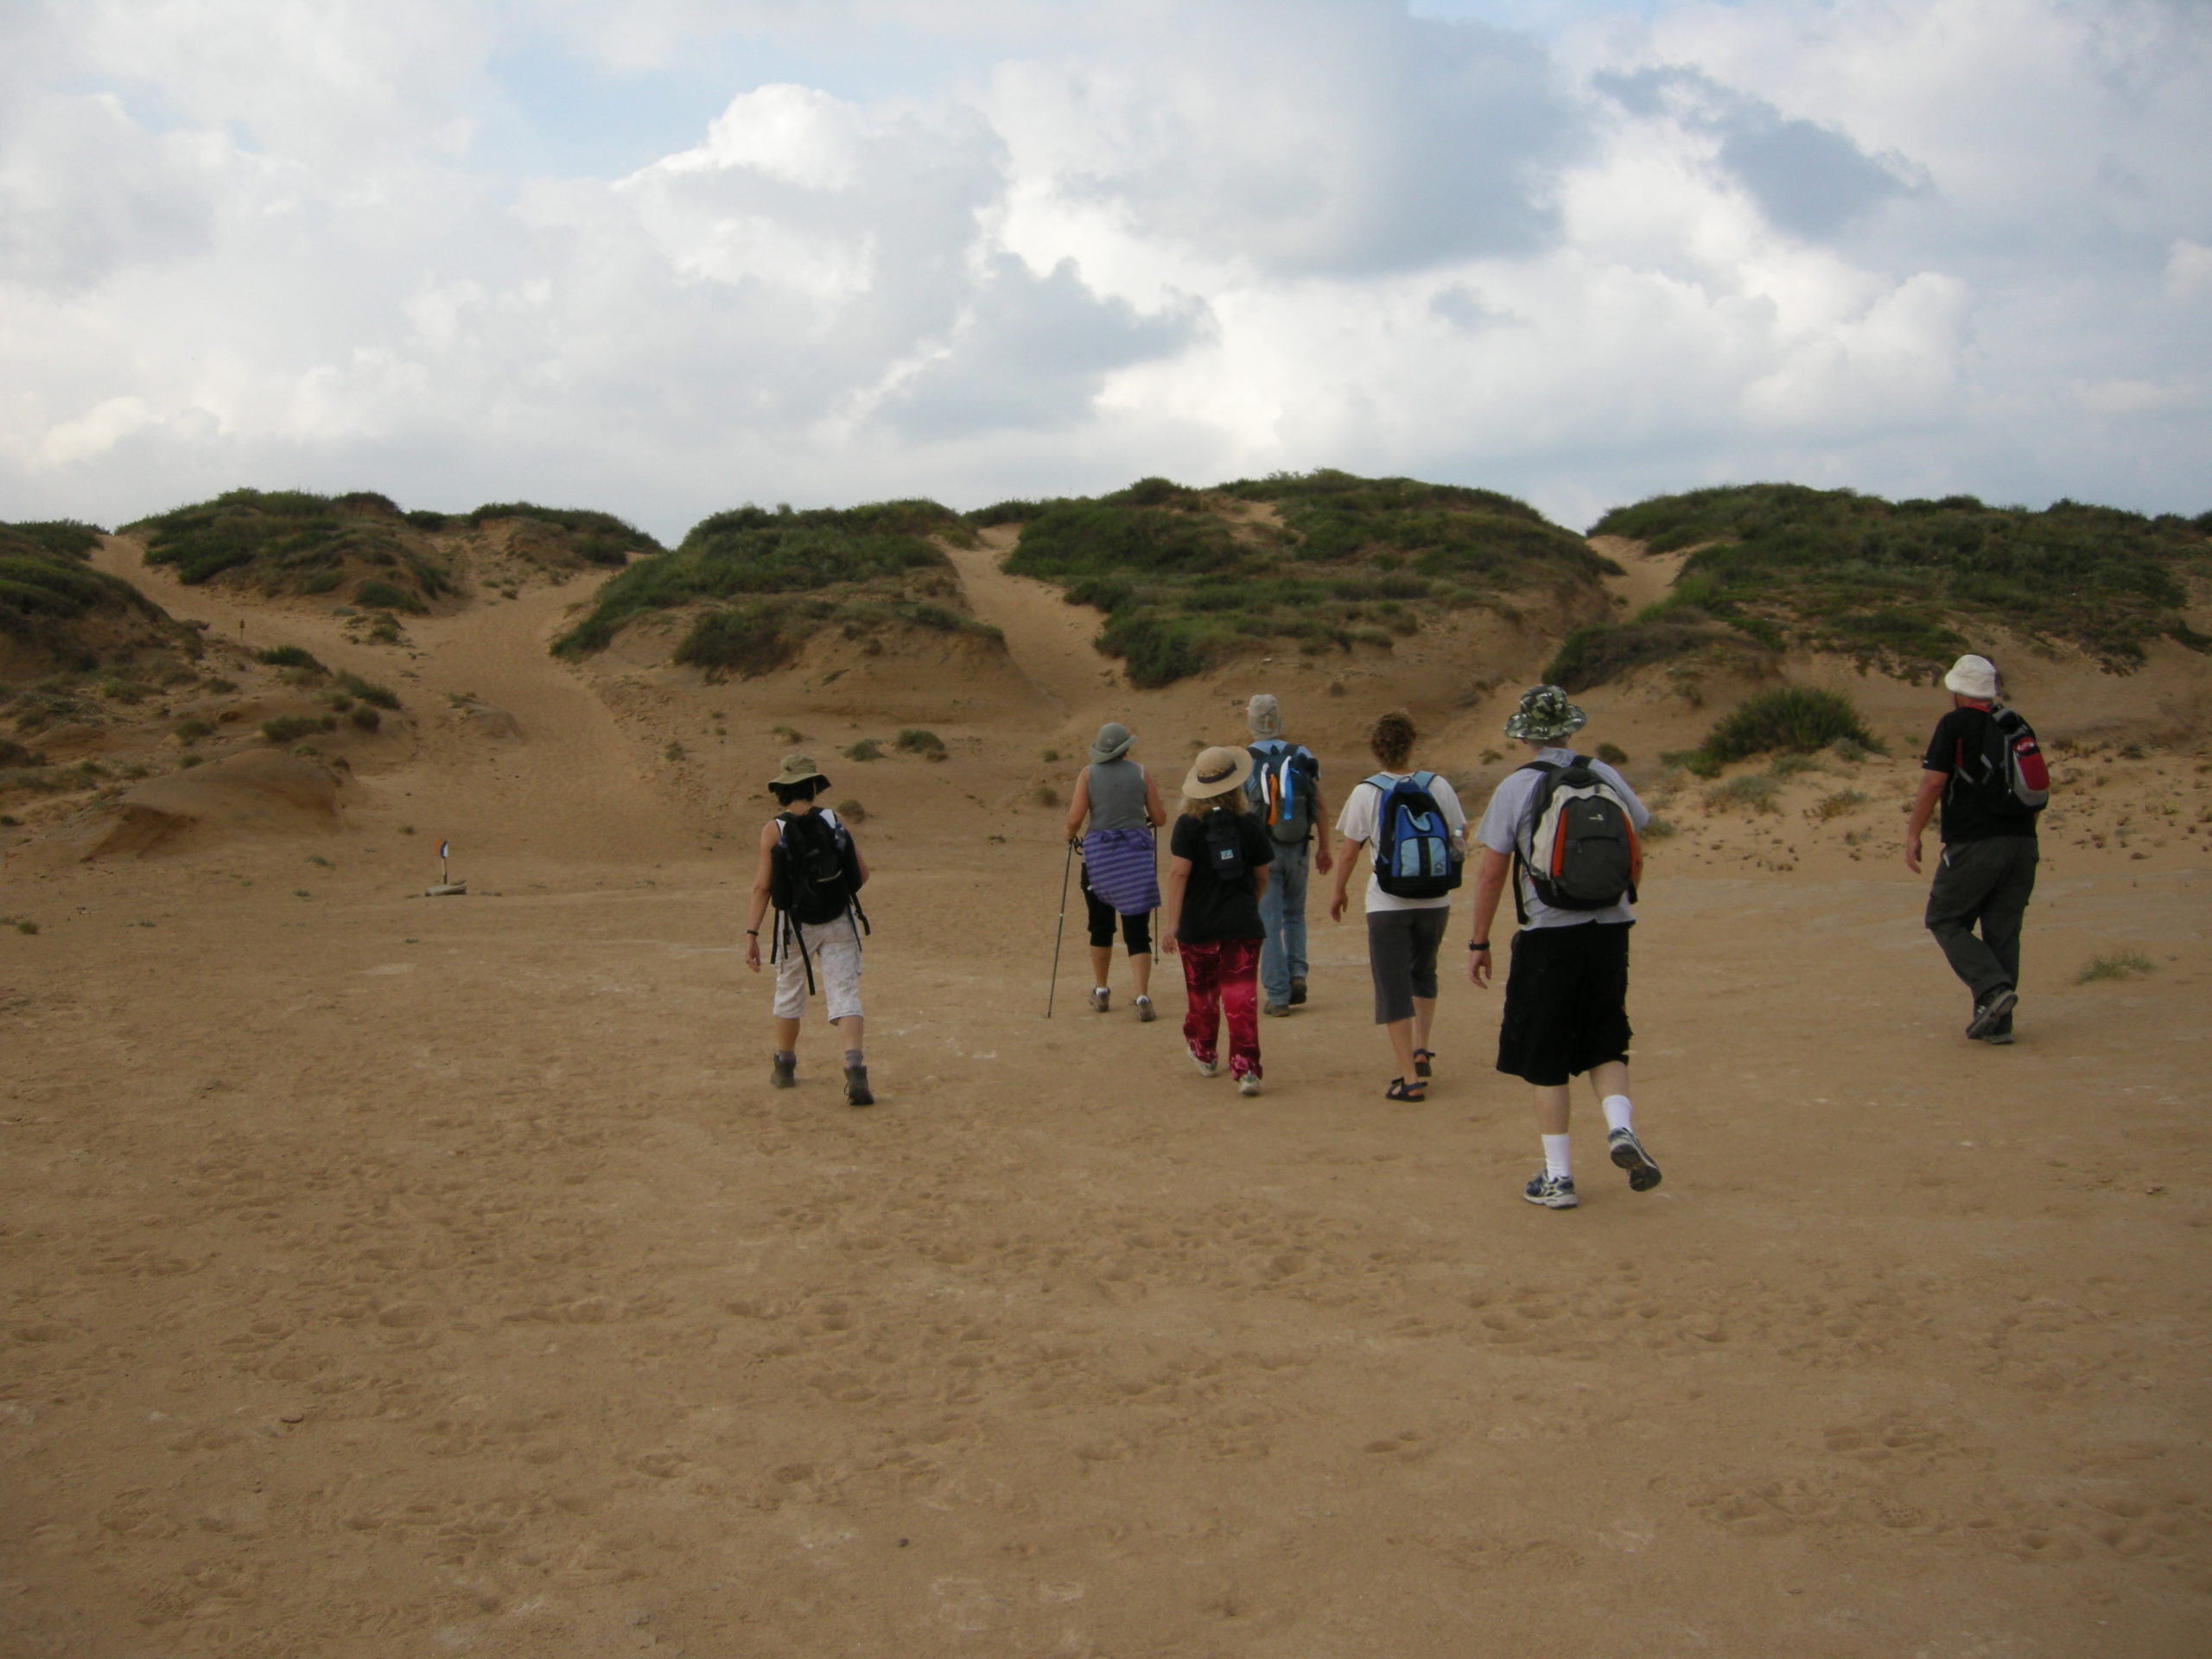 a group of hikers in an open sandy area